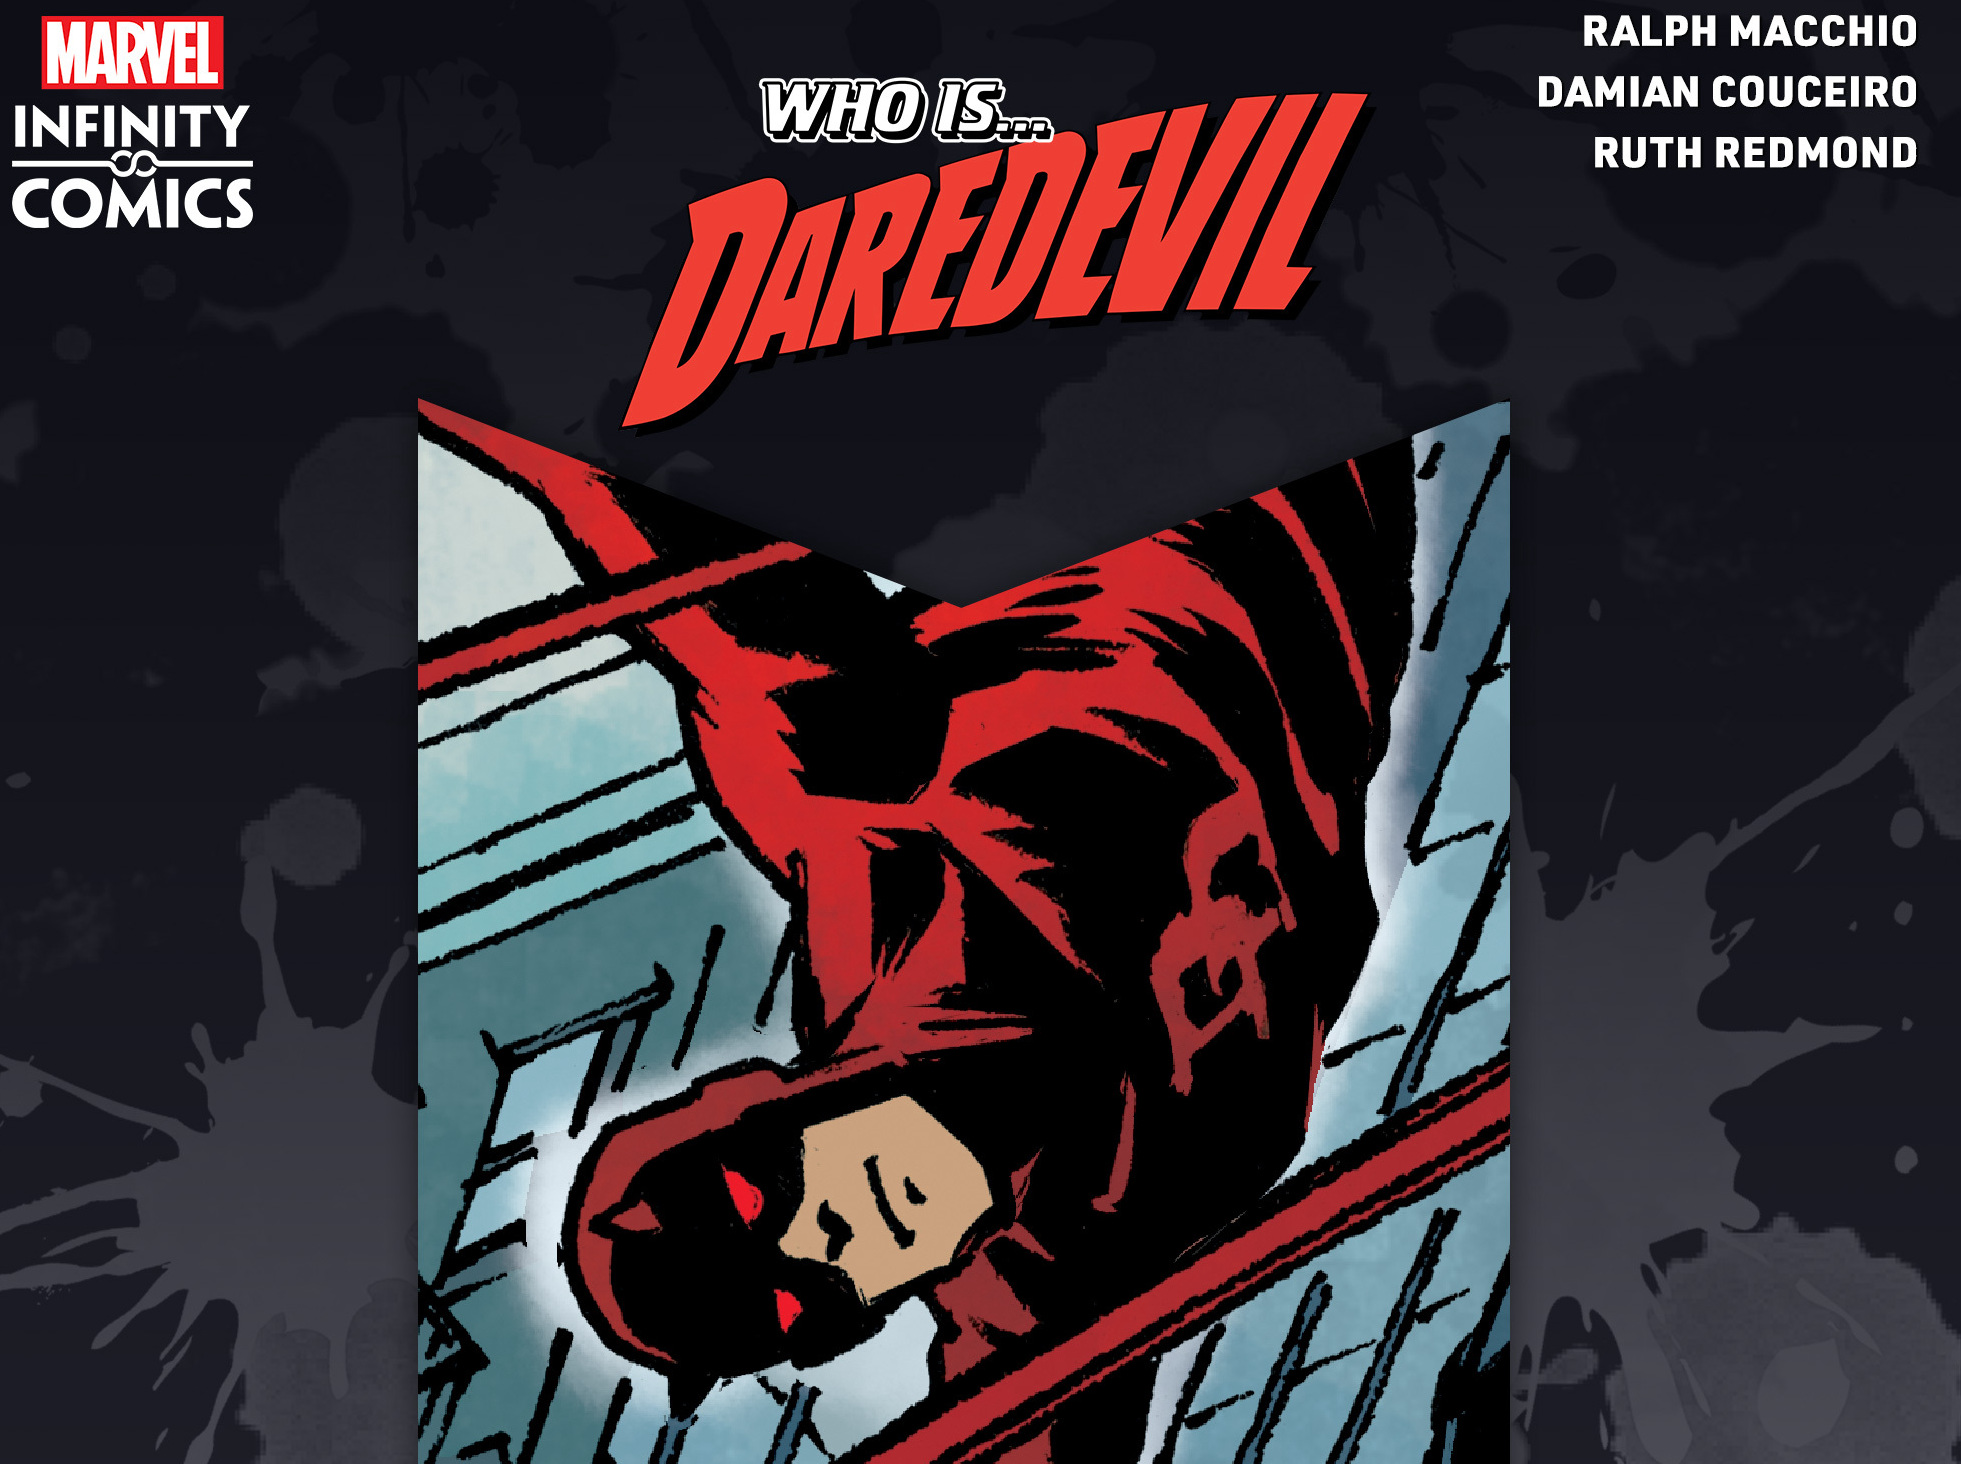 Marvel launches 'Who is... Daredevil?' #1 today on Marvel Unlimited